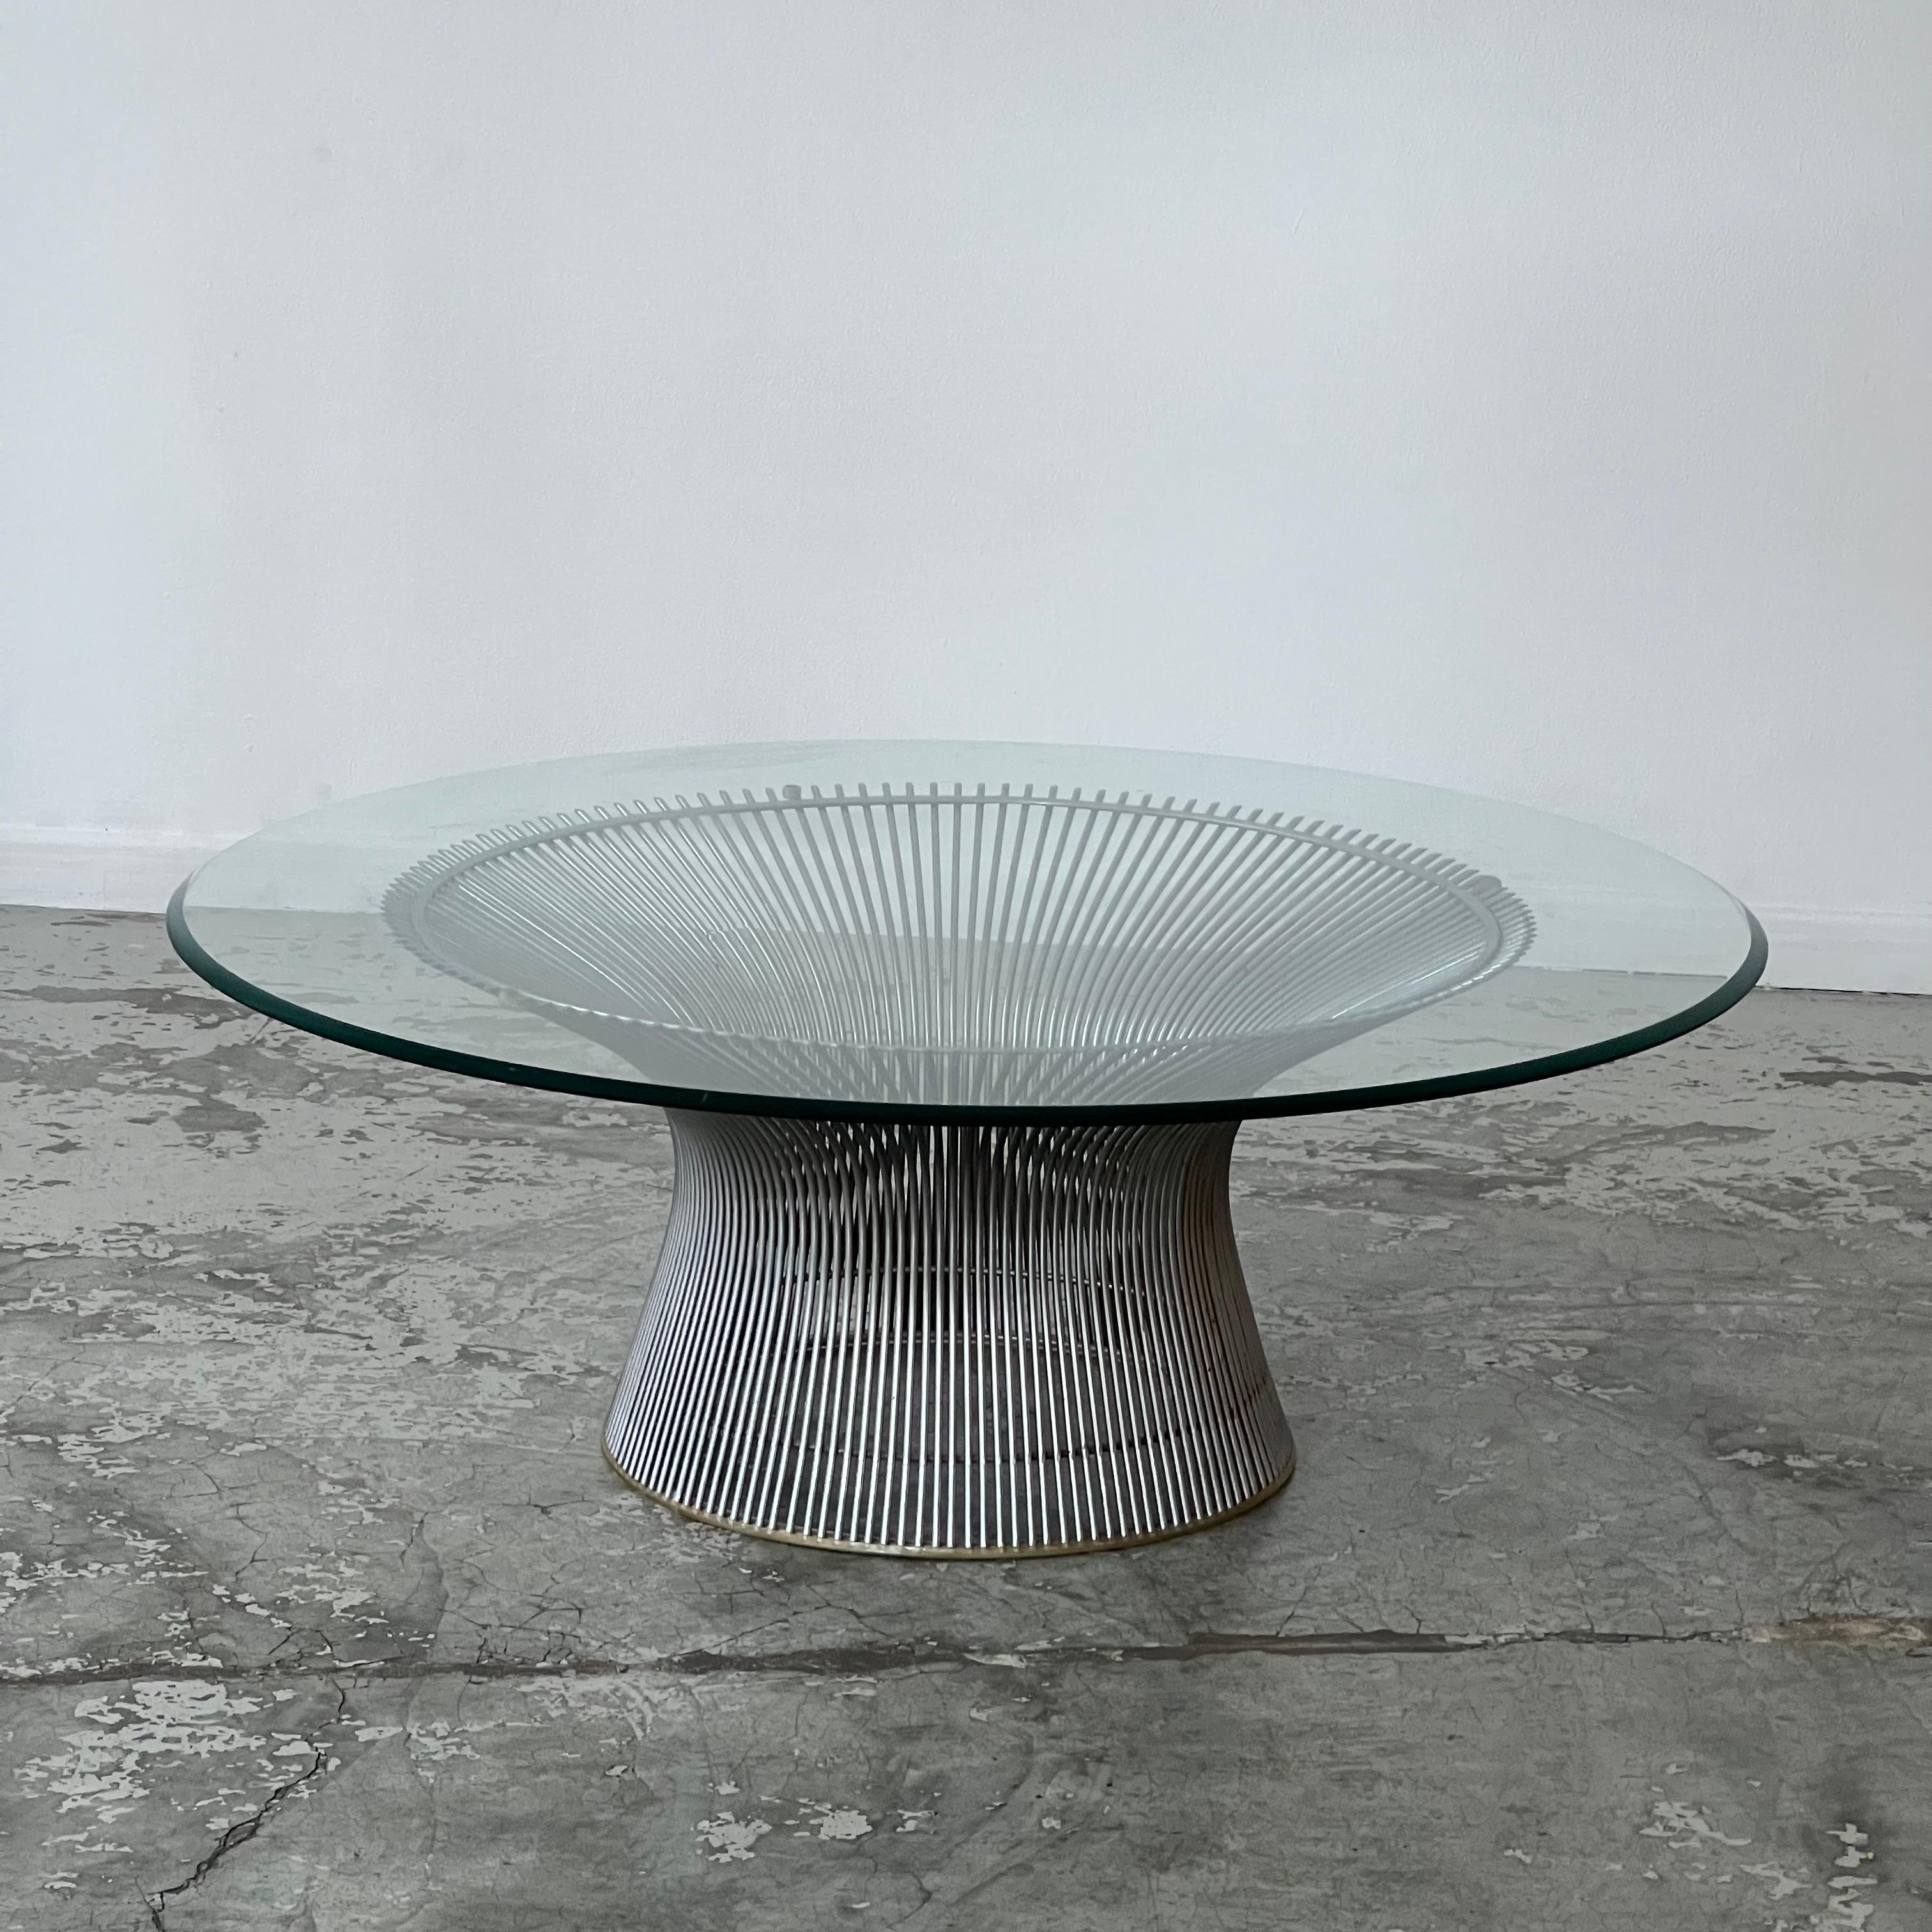 This coffee table was designed by Warren Platner Warren for Knoll International in 1966.
This architect/designer founded Platner Associates and made a name for himself with his graceful creations, exploring the design of furniture, lighting and